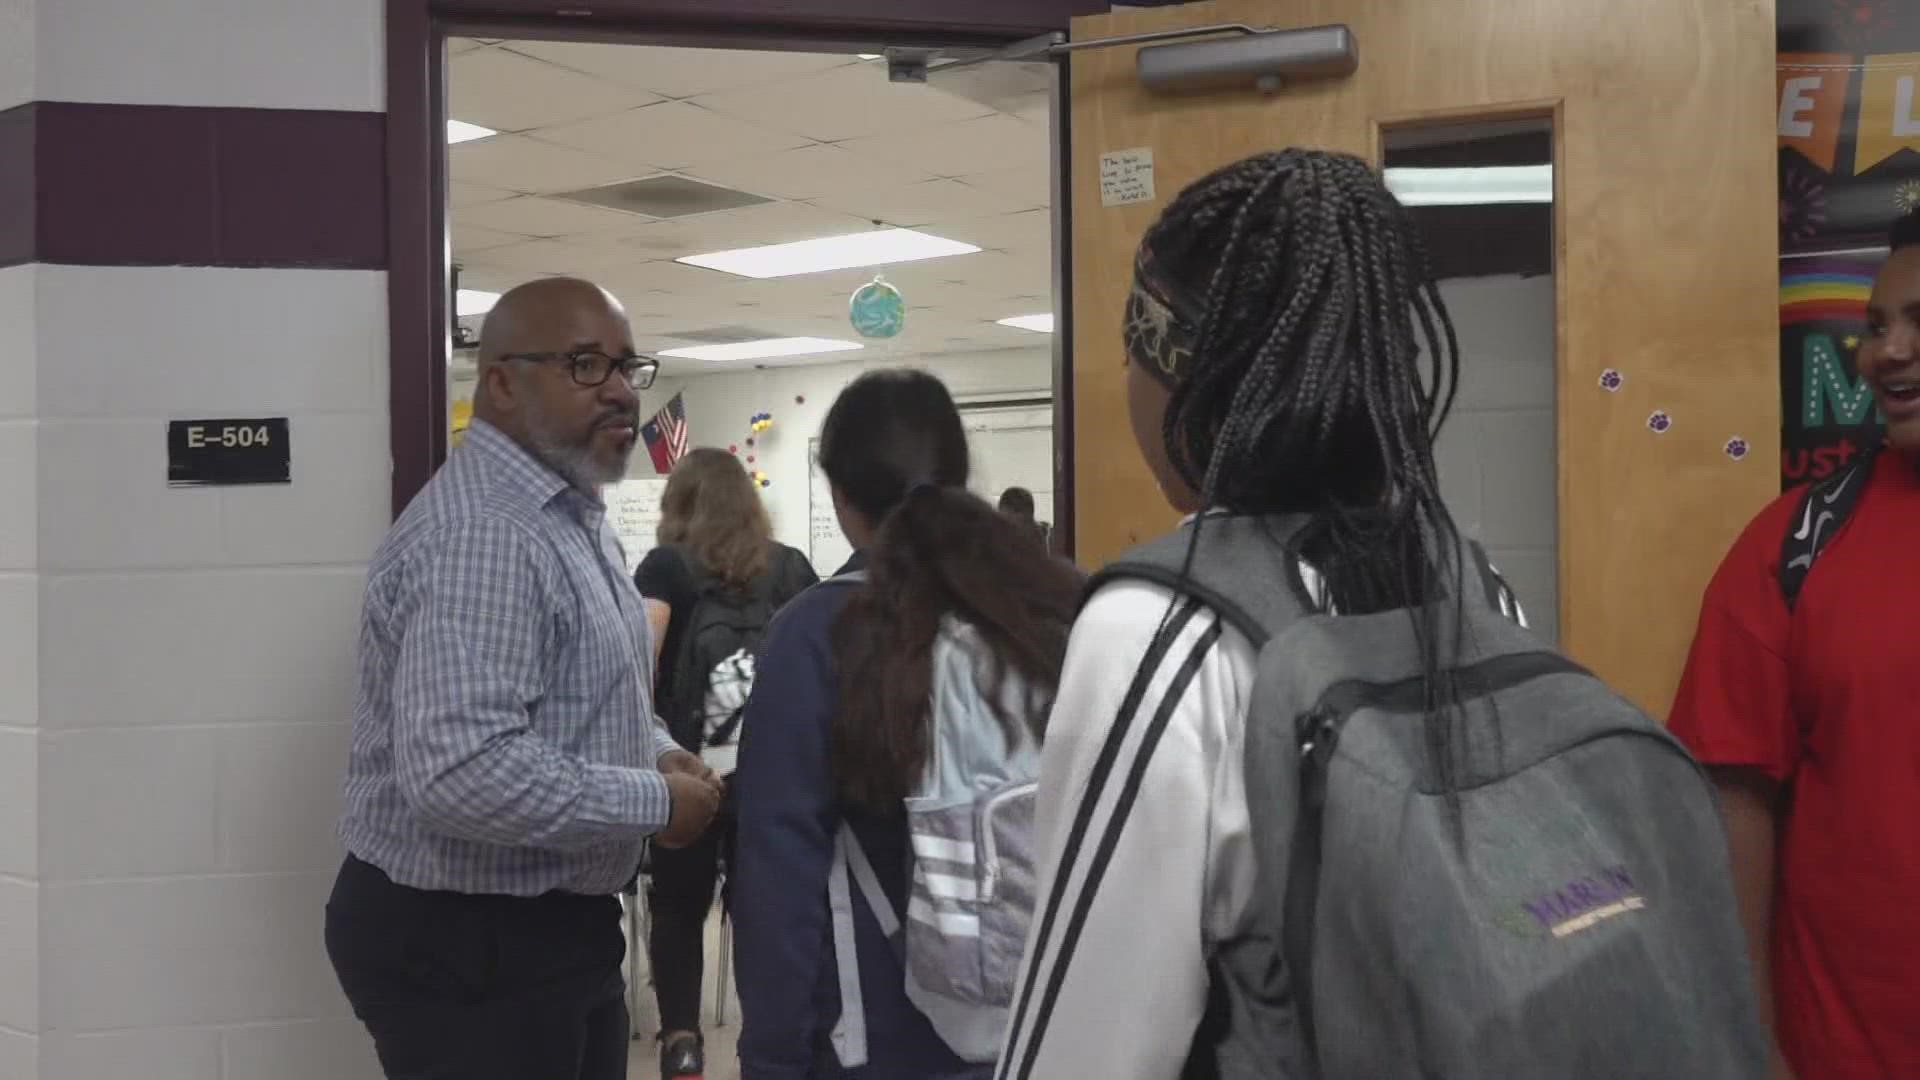 "If you fail one time that's like an "F"... two that's a light "F"...ten times in a row that's a super "F,"" Marlin ISD Superintendent Dr. Darryl J. Henson said.